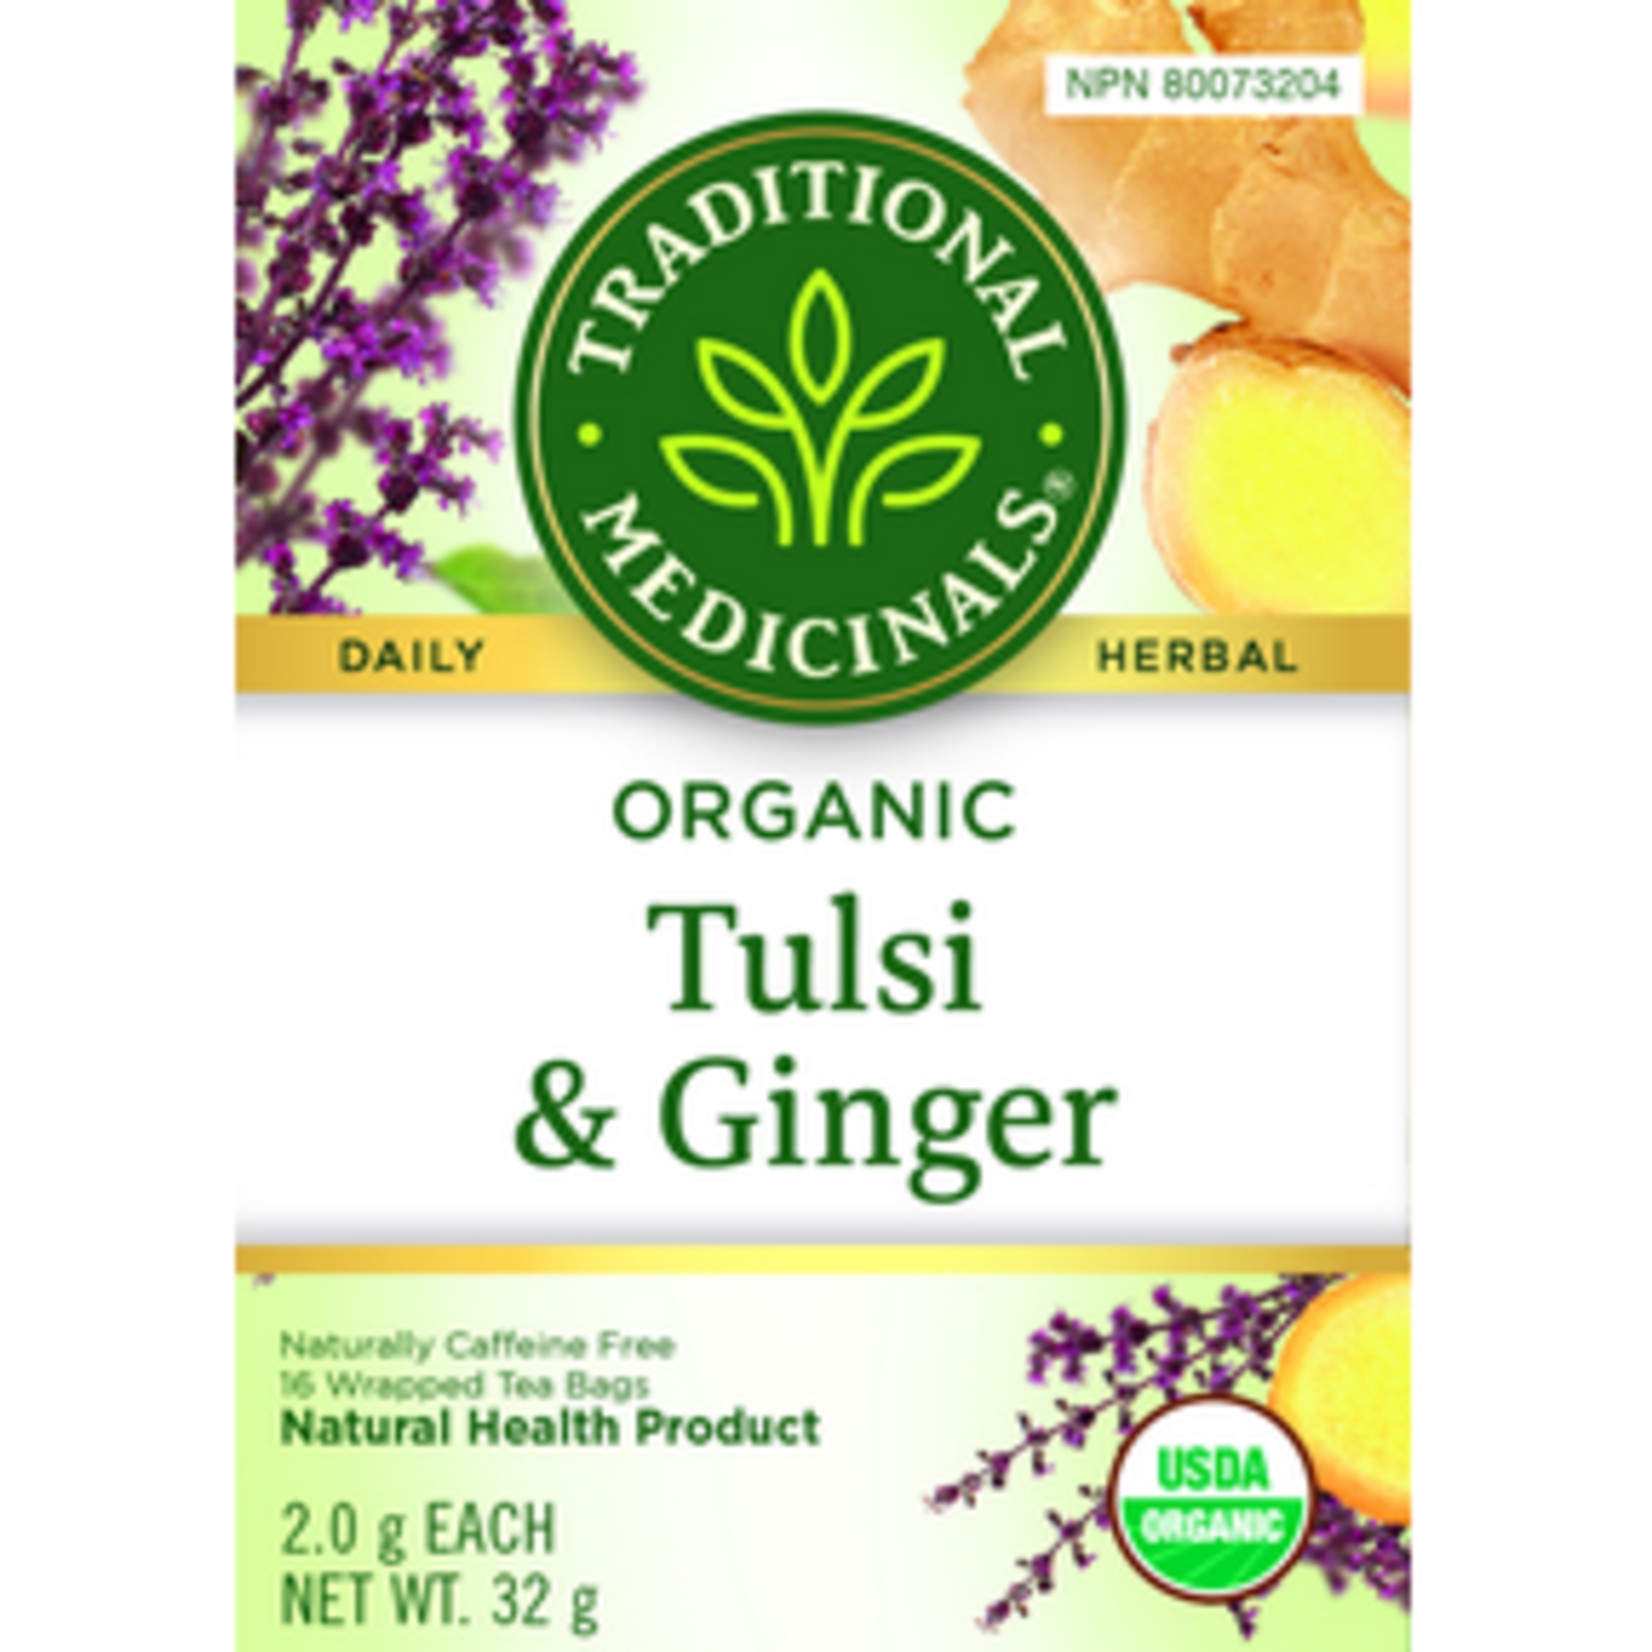 TRADITIONAL MEDICINALS TRADITIONAL MEDICINALS ORGANIC TULSI & GINGER 16 BAGS